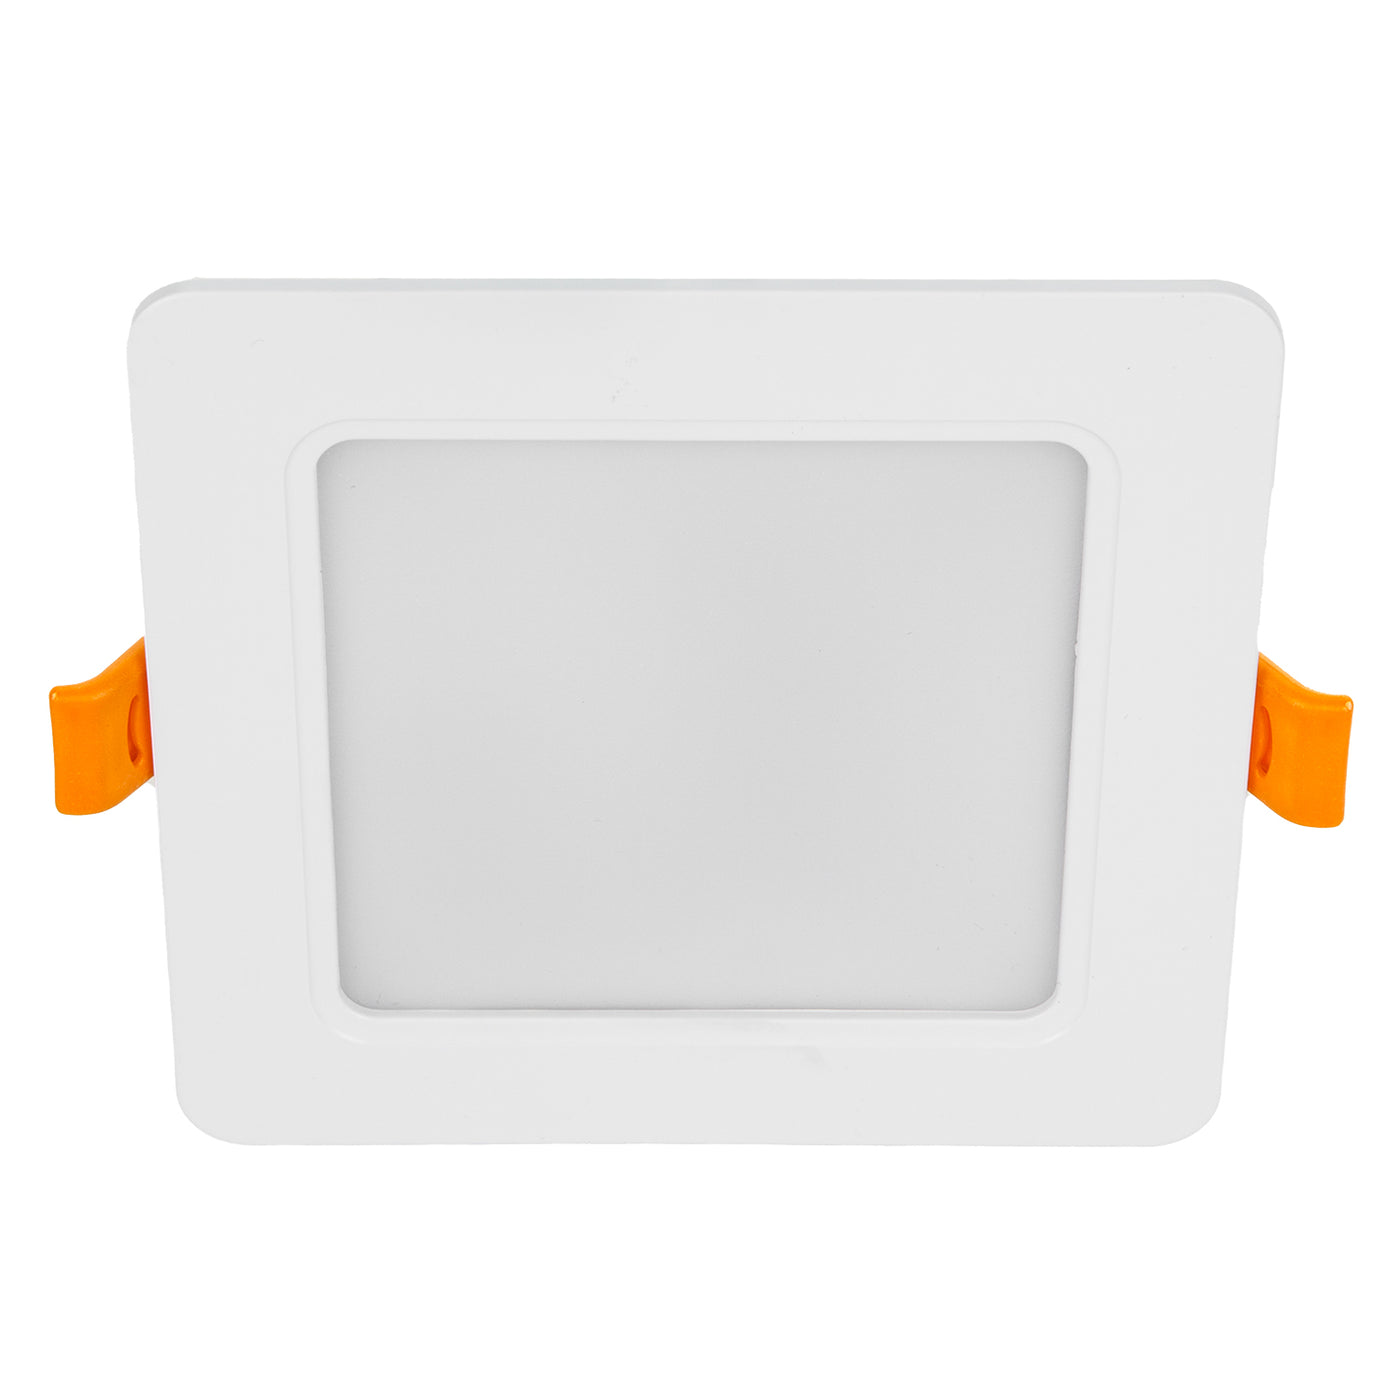 Panel LED sufitowy Maclean, podtynkowy SLIM, 9W, Neutral White 4000K, 120*120*26mm, 900lm, MCE373 S